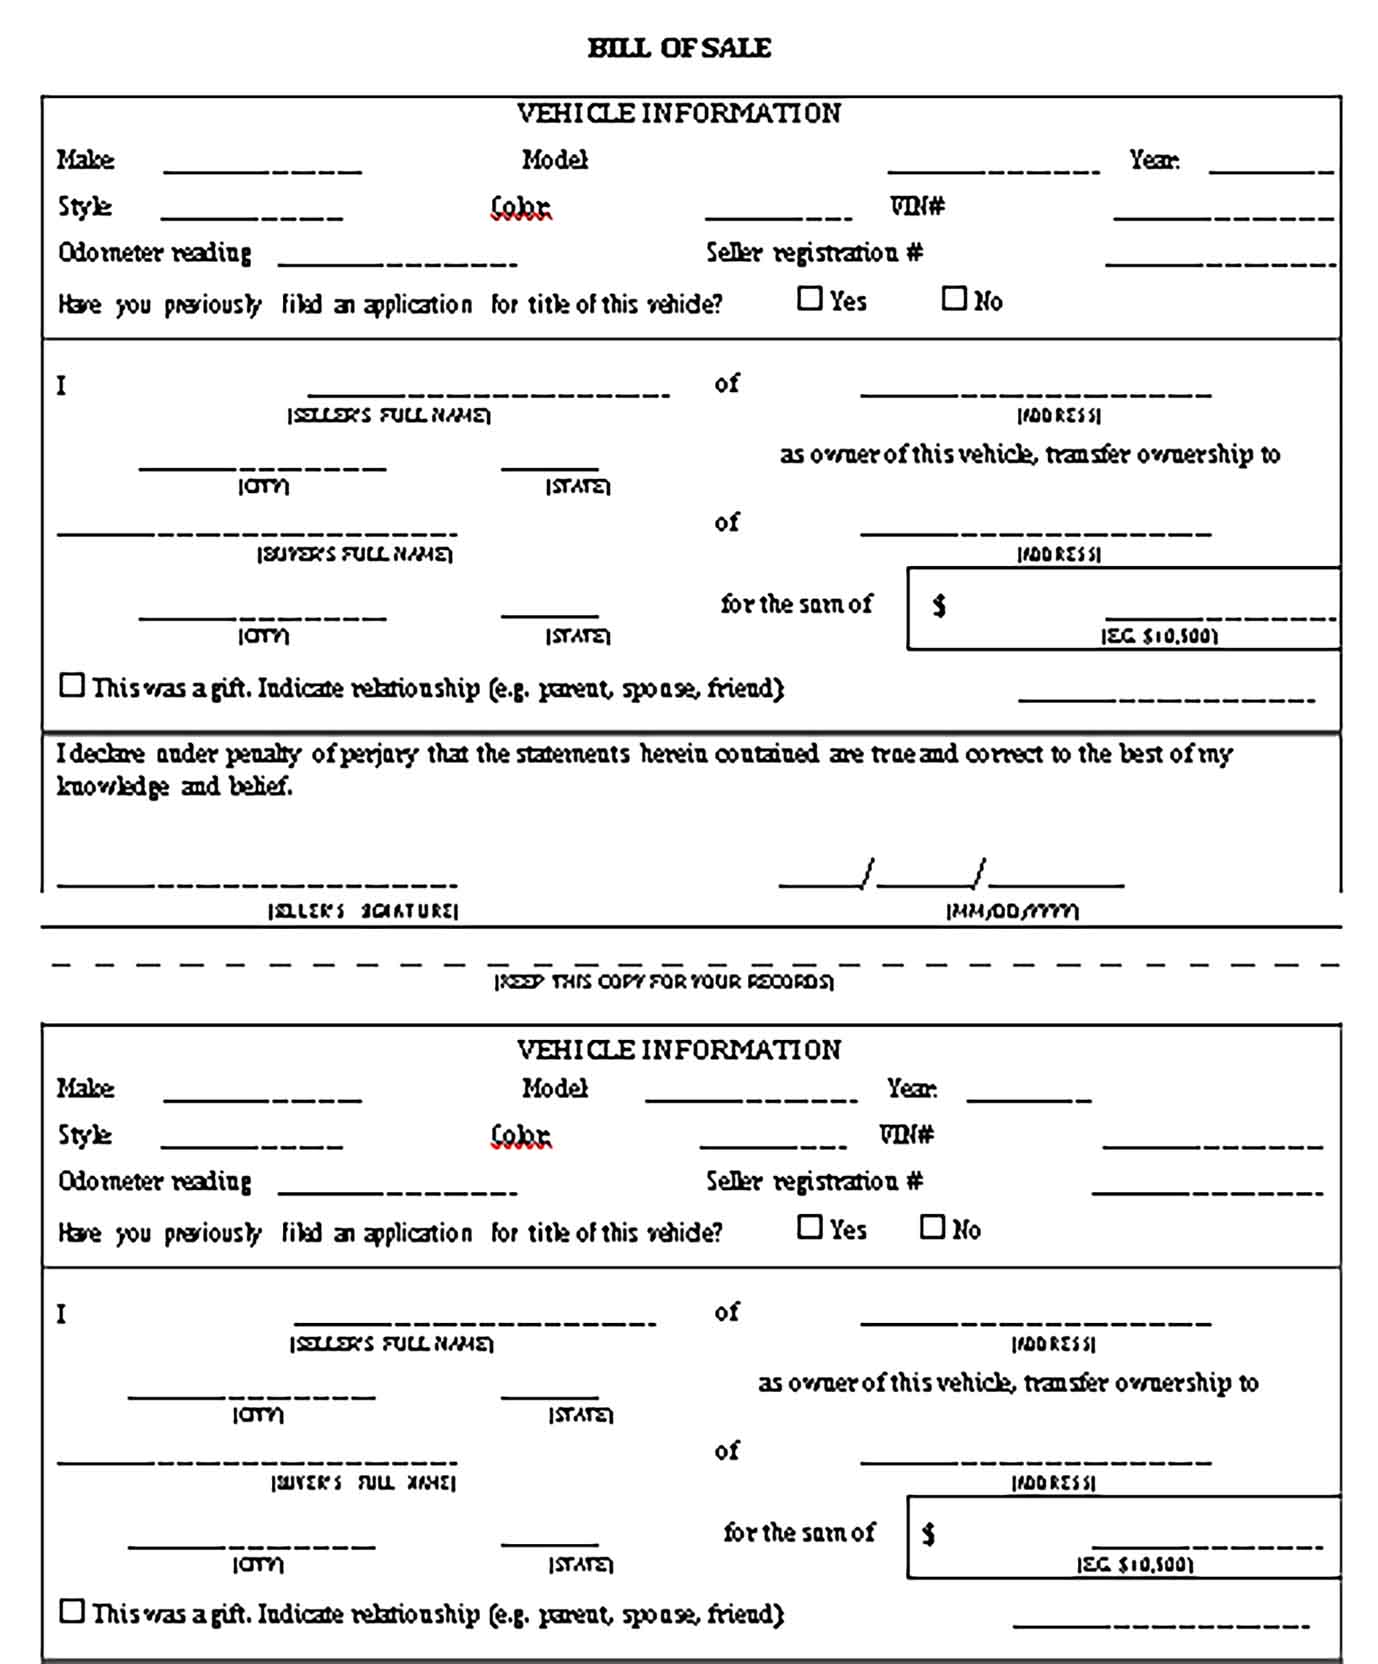 Sample Vehicle Bill of Sale Form Templates